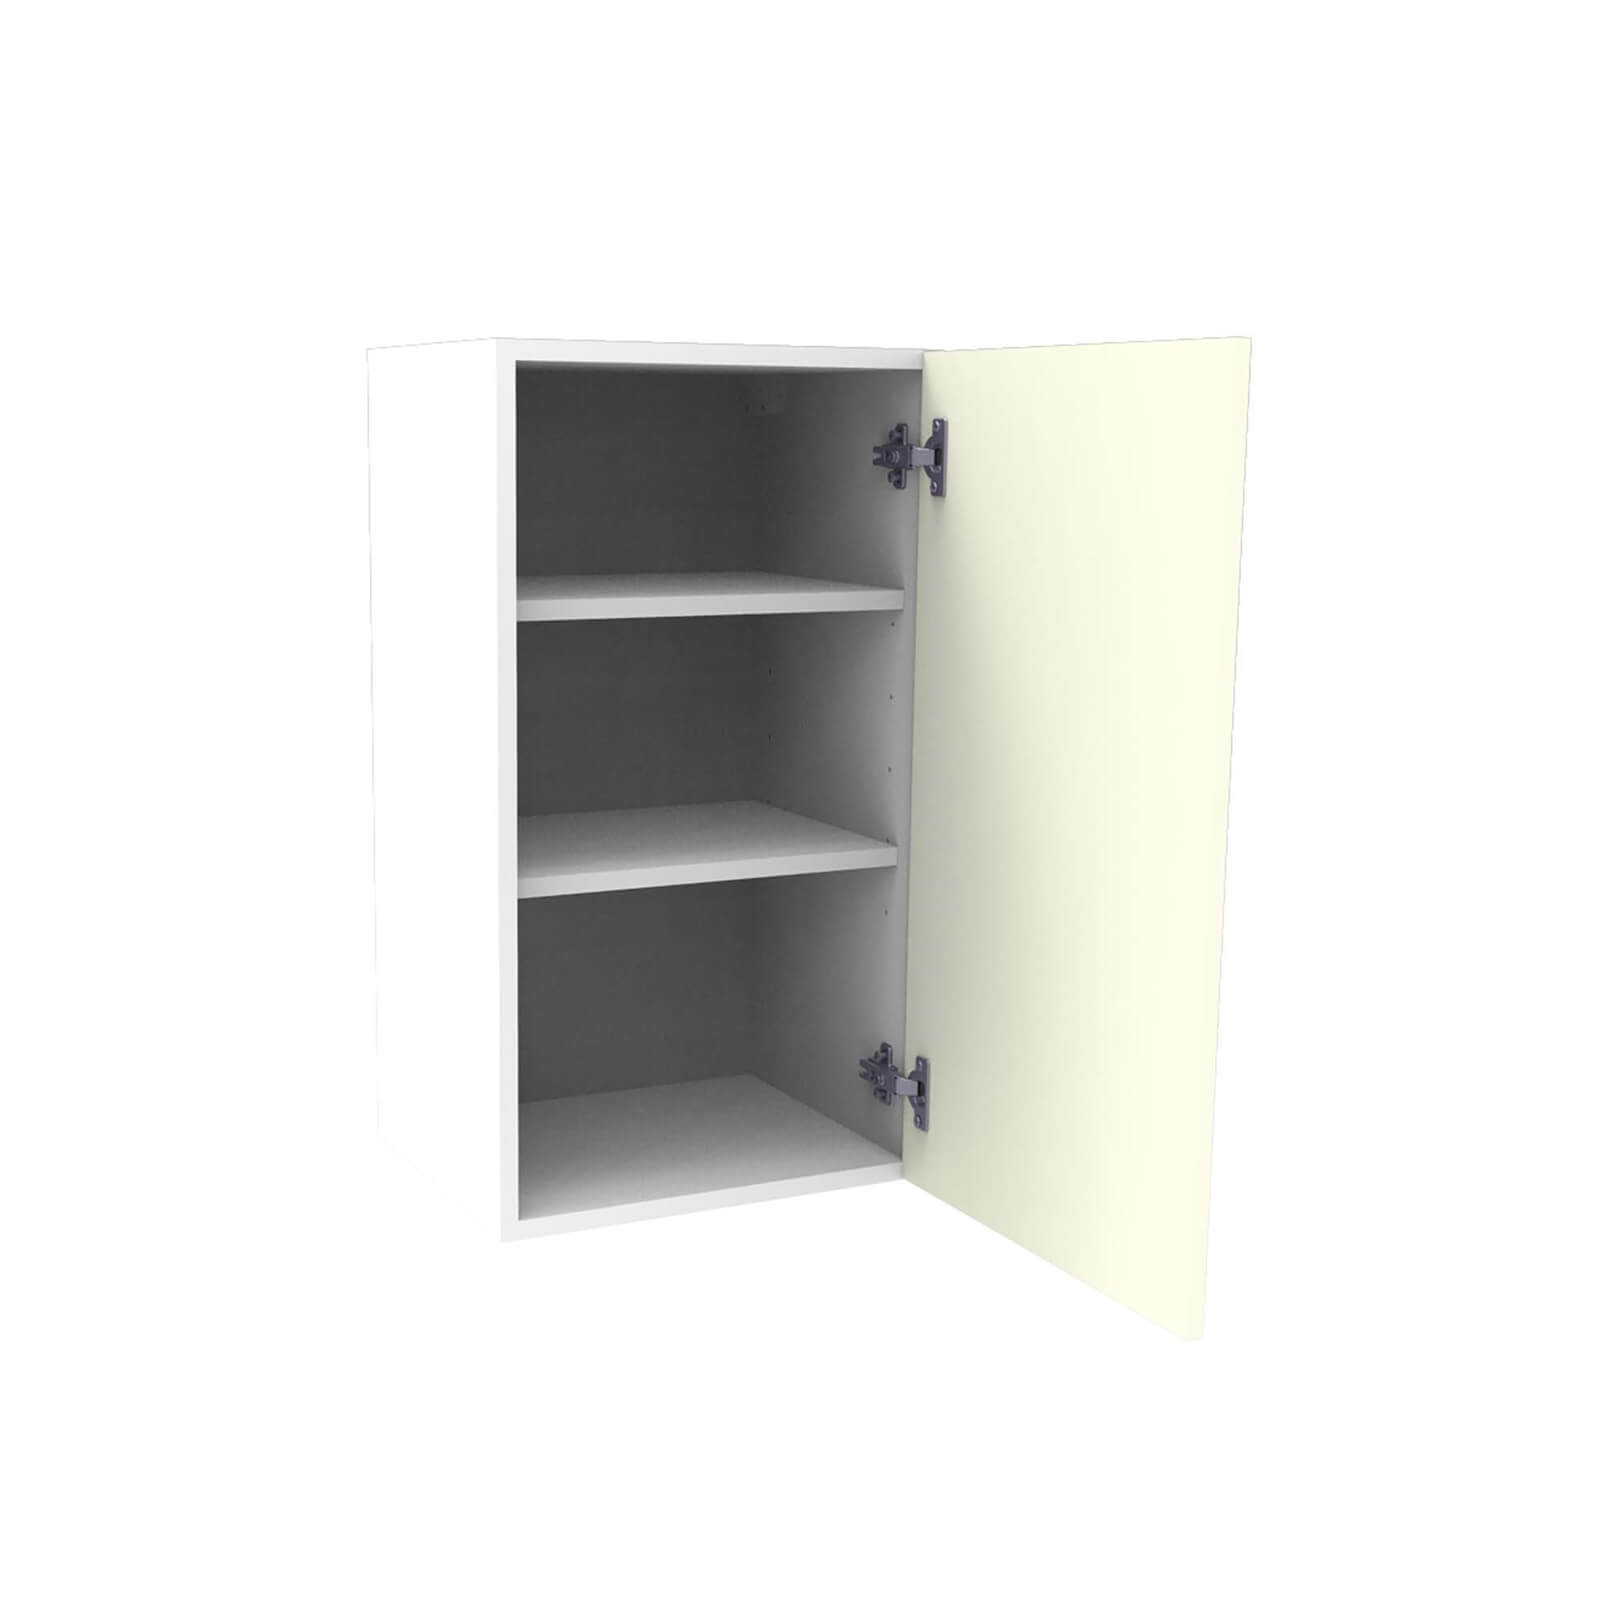 Country Shaker Cream 400mm Wall Unit